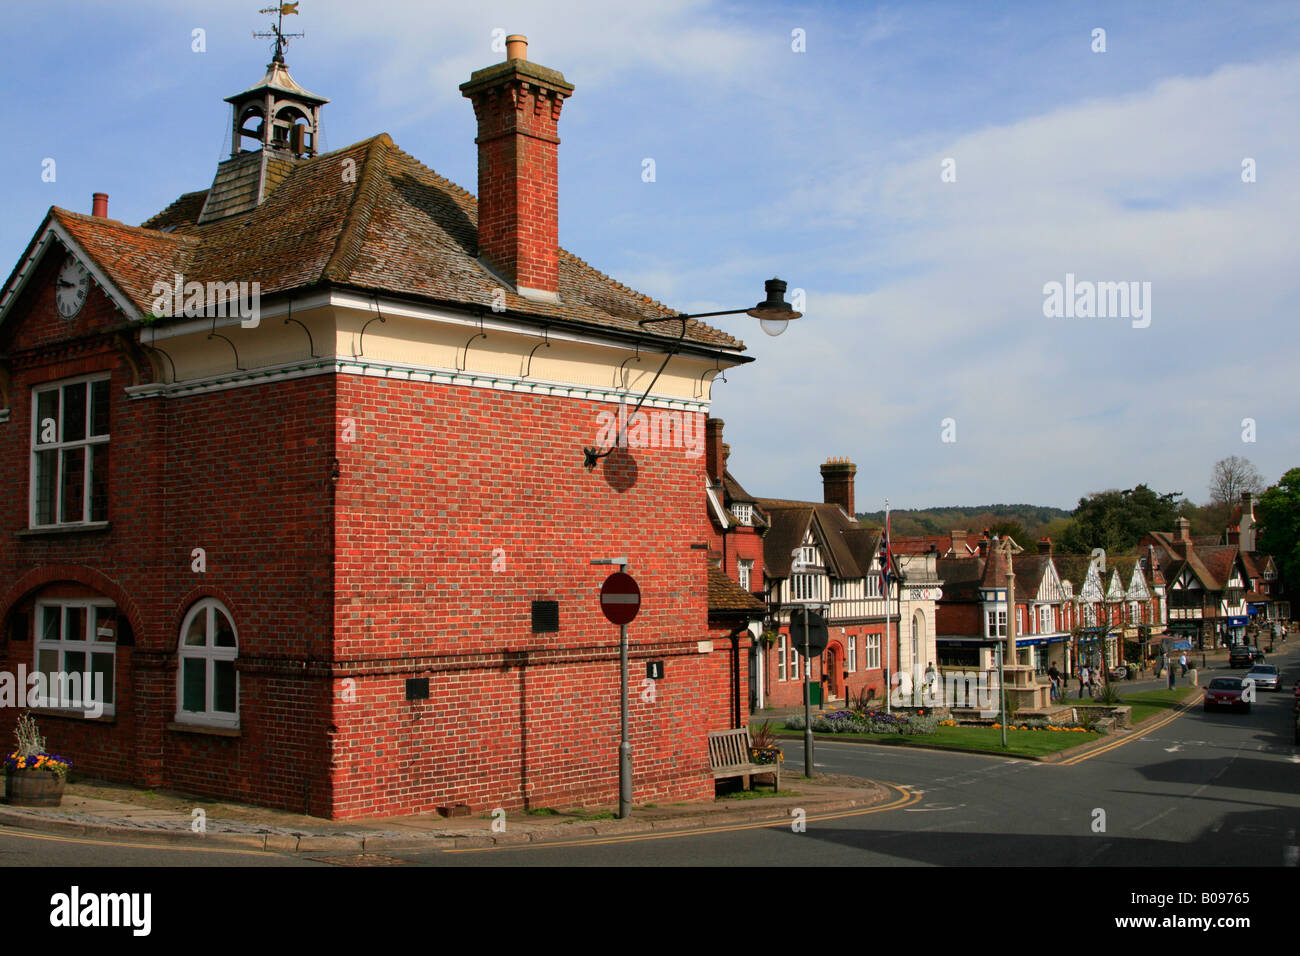 Haslemere is a town in Surrey, England, close to the border with both Hampshire and West Sussex. Stock Photo